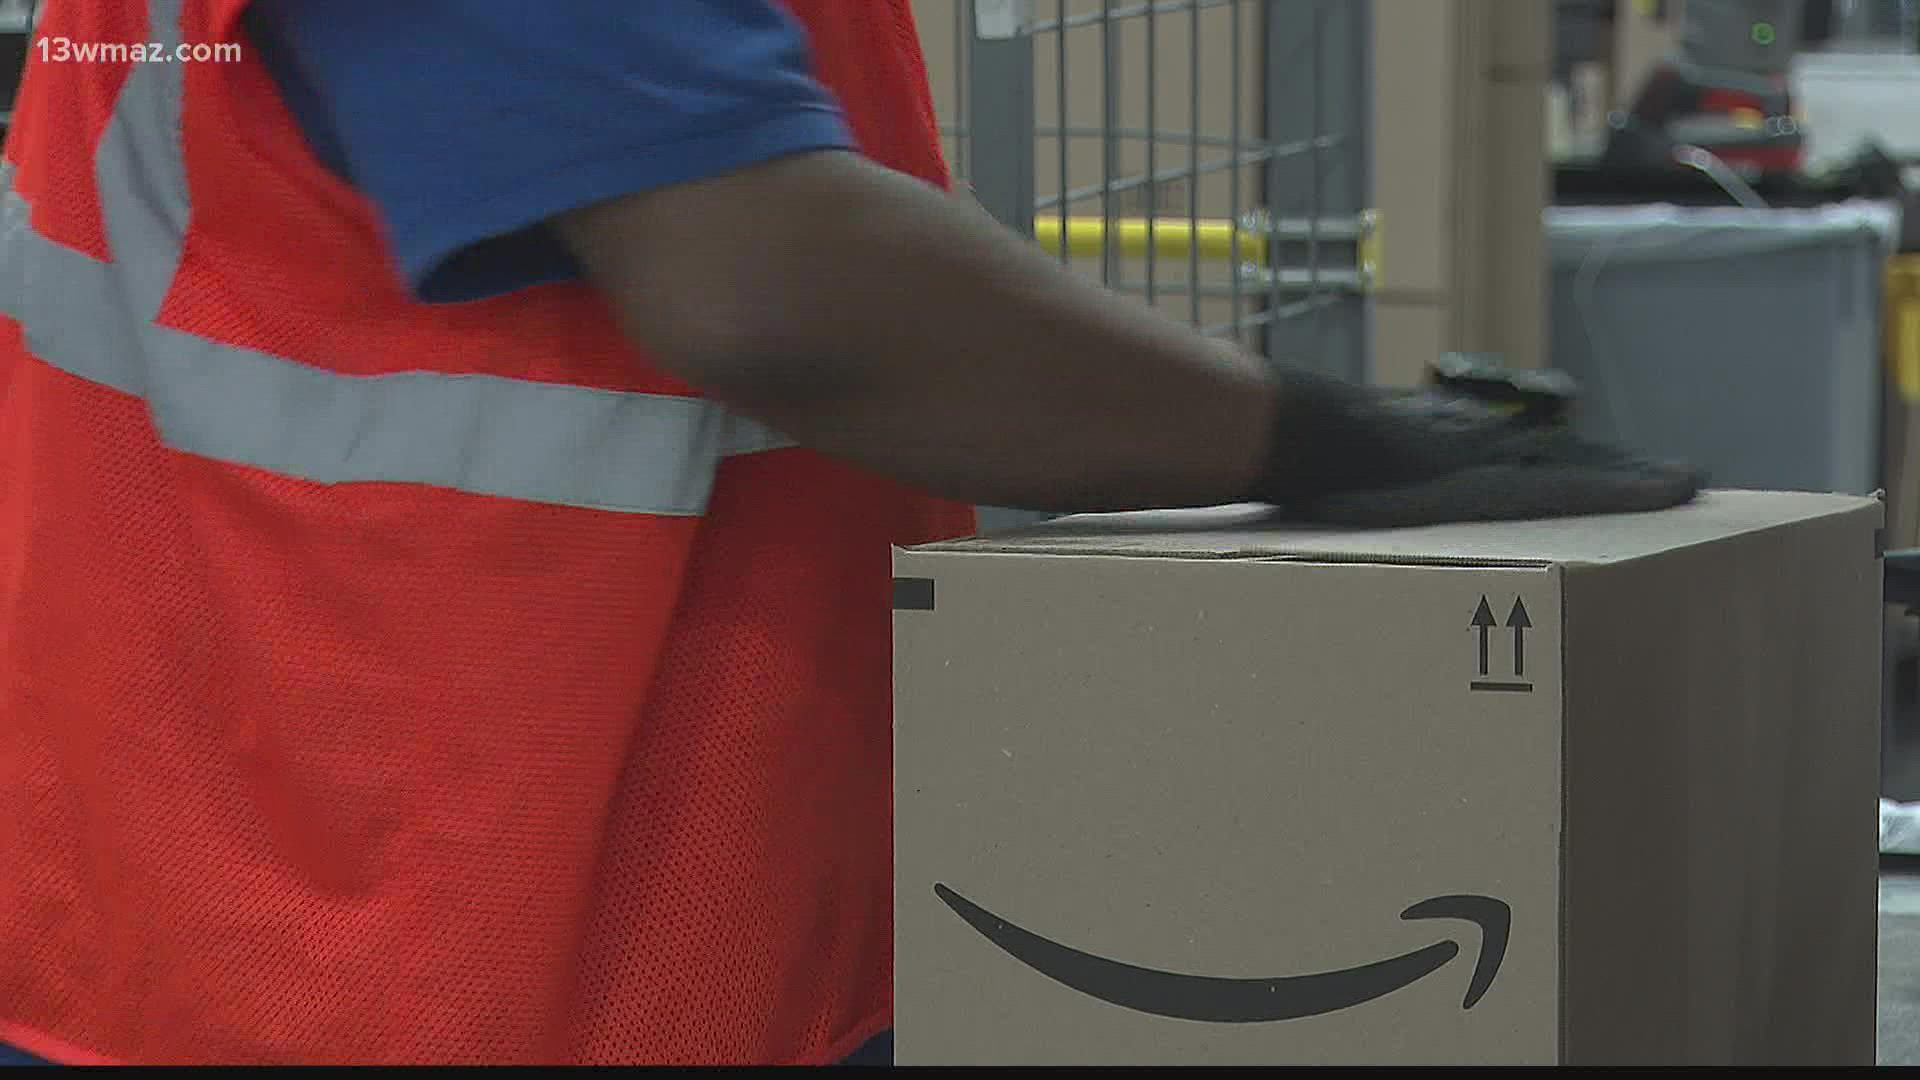 Amazon in Macon can ship hundreds of thousands of packages a day.